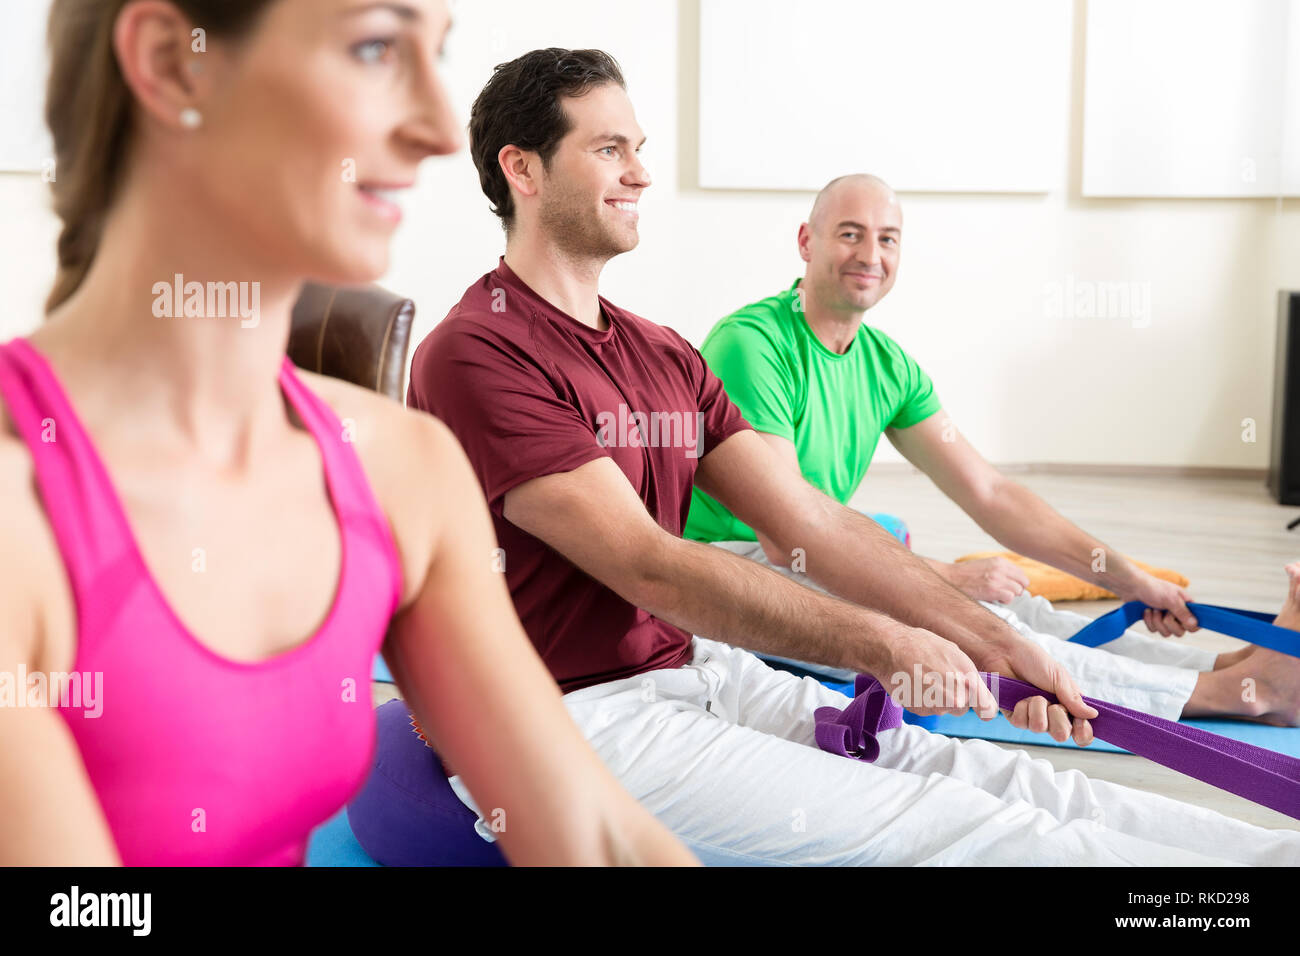 Man performing foot exercises with thera band Stock Photo